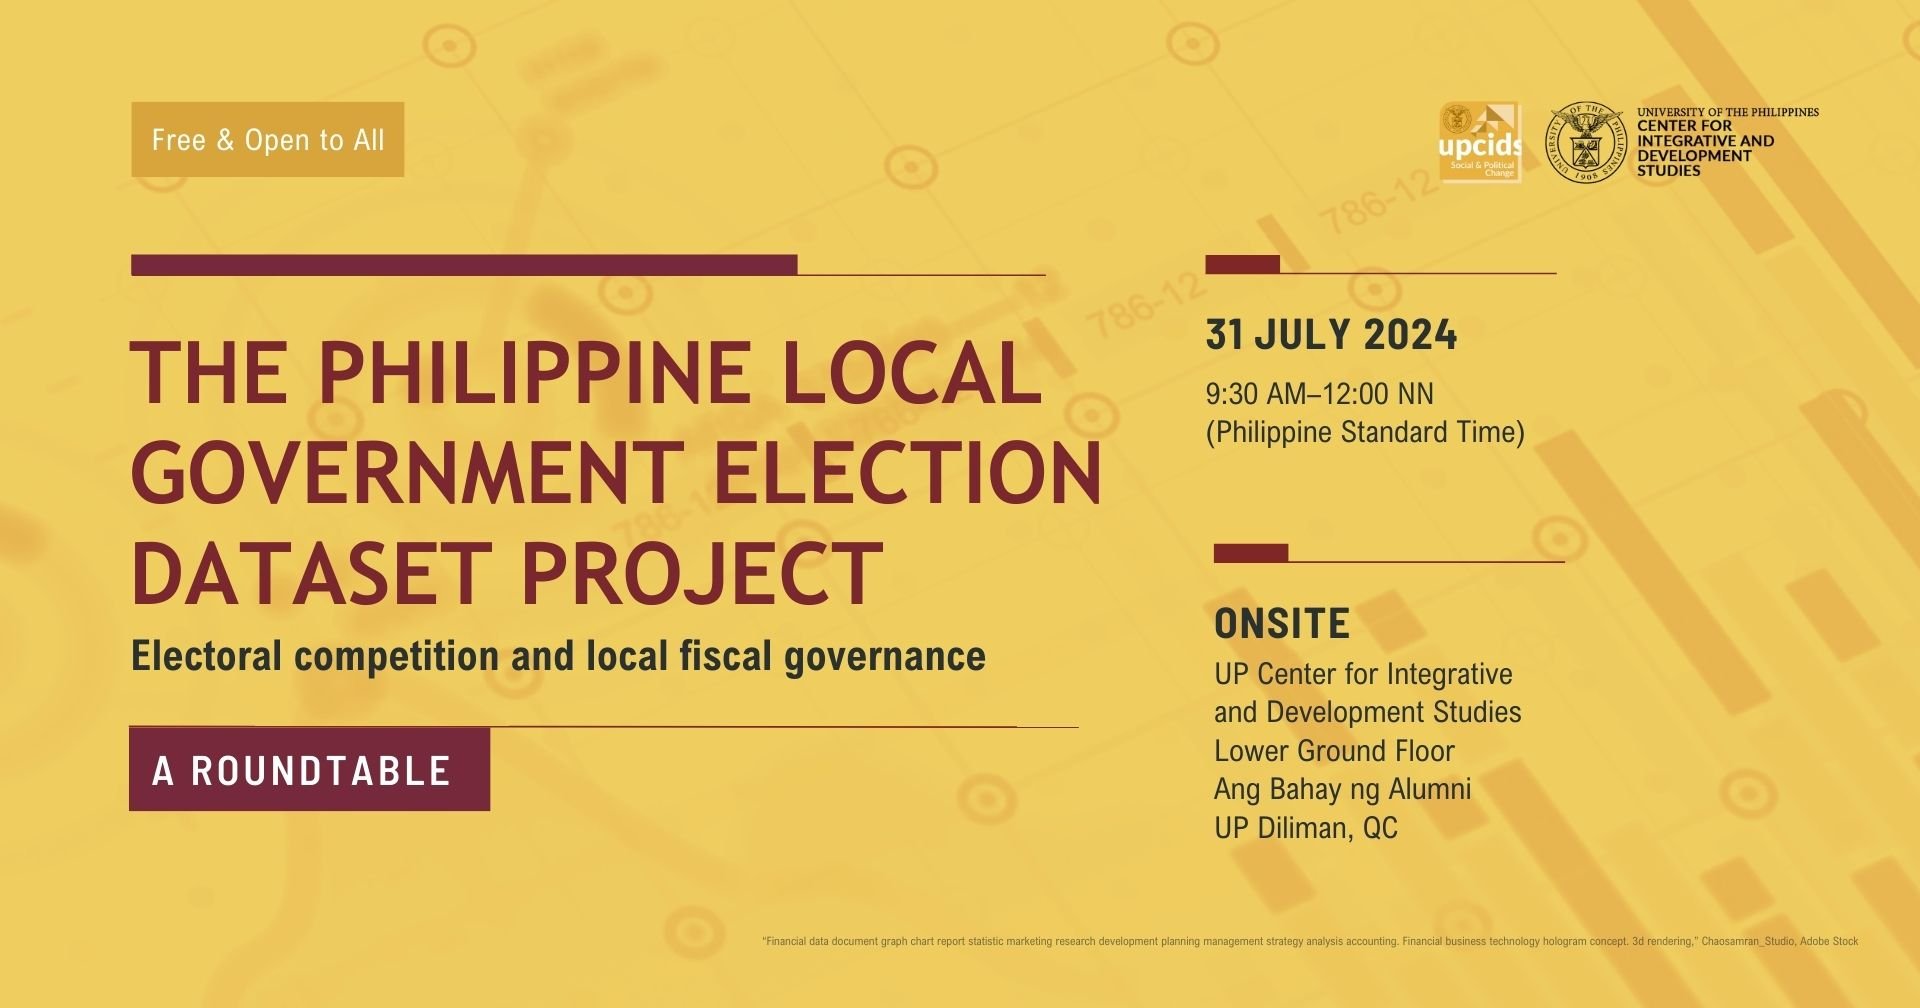 wp-content/uploads/2024/07/The_Philippine_Local-Government_Election_Dataset-Project_SL01.jpg